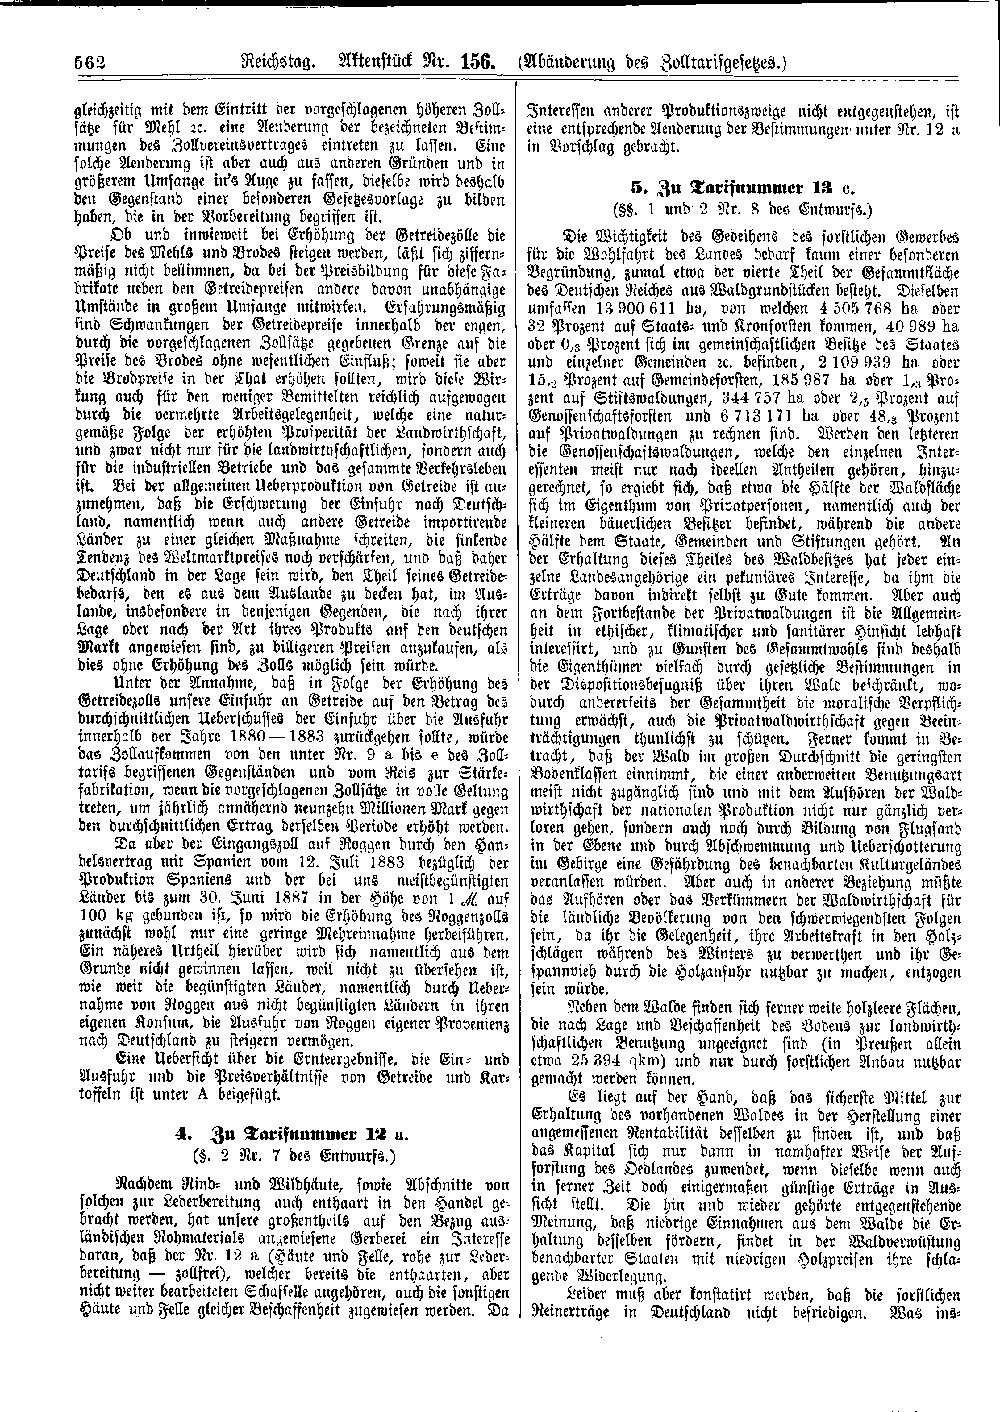 Scan of page 562